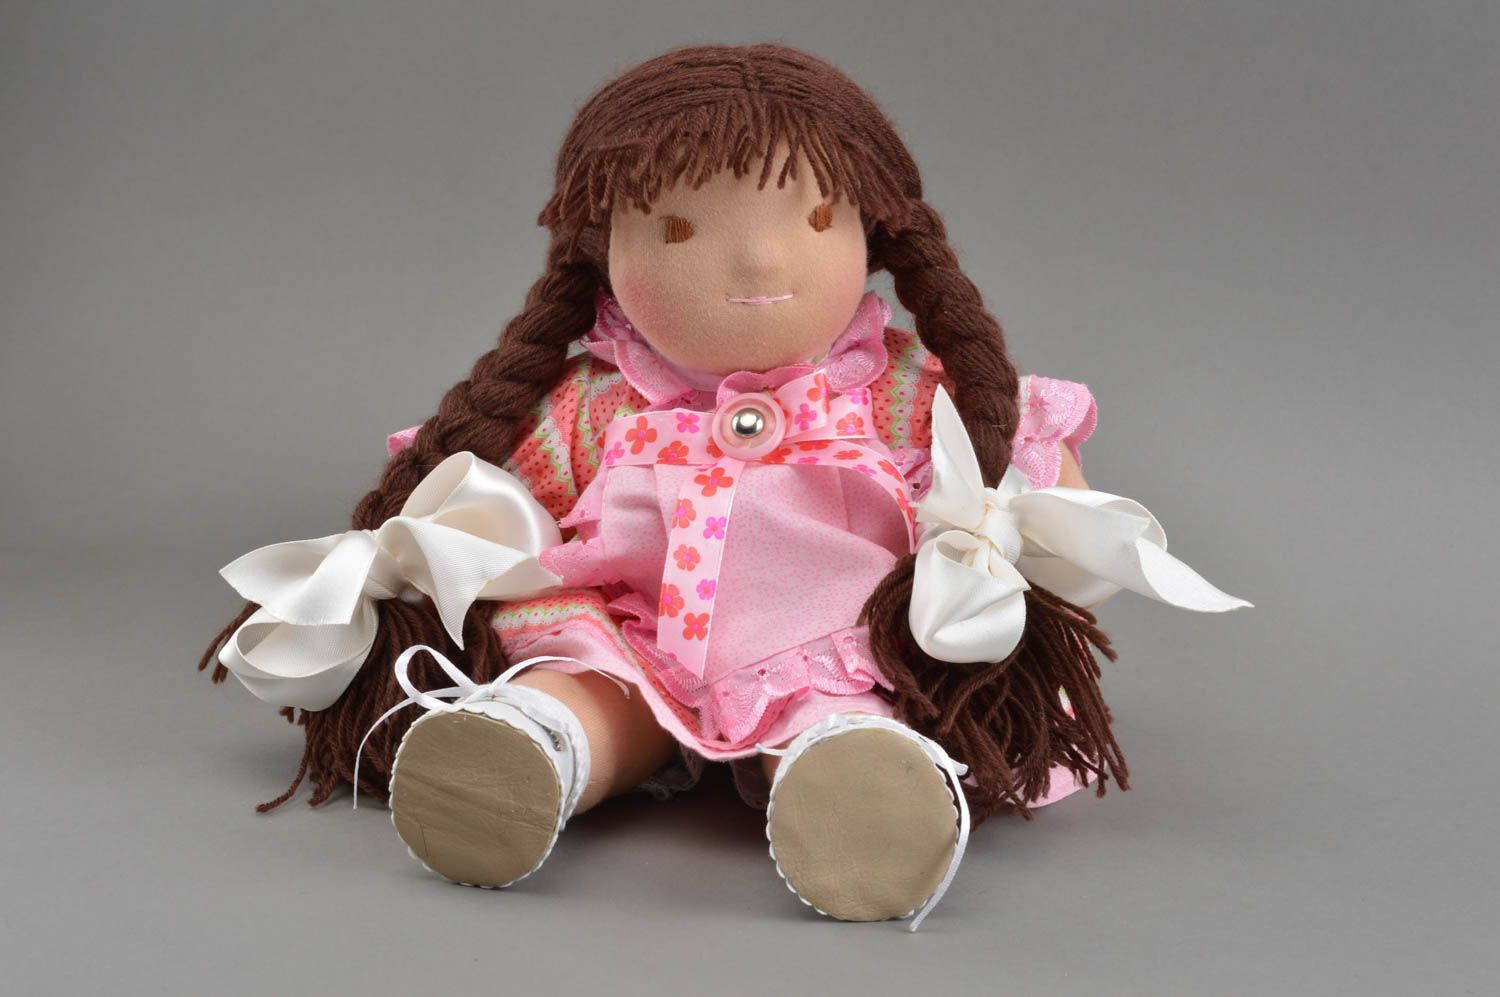 Designer doll handcrafted soft toy fabric stuffed toy for children and decor photo 3